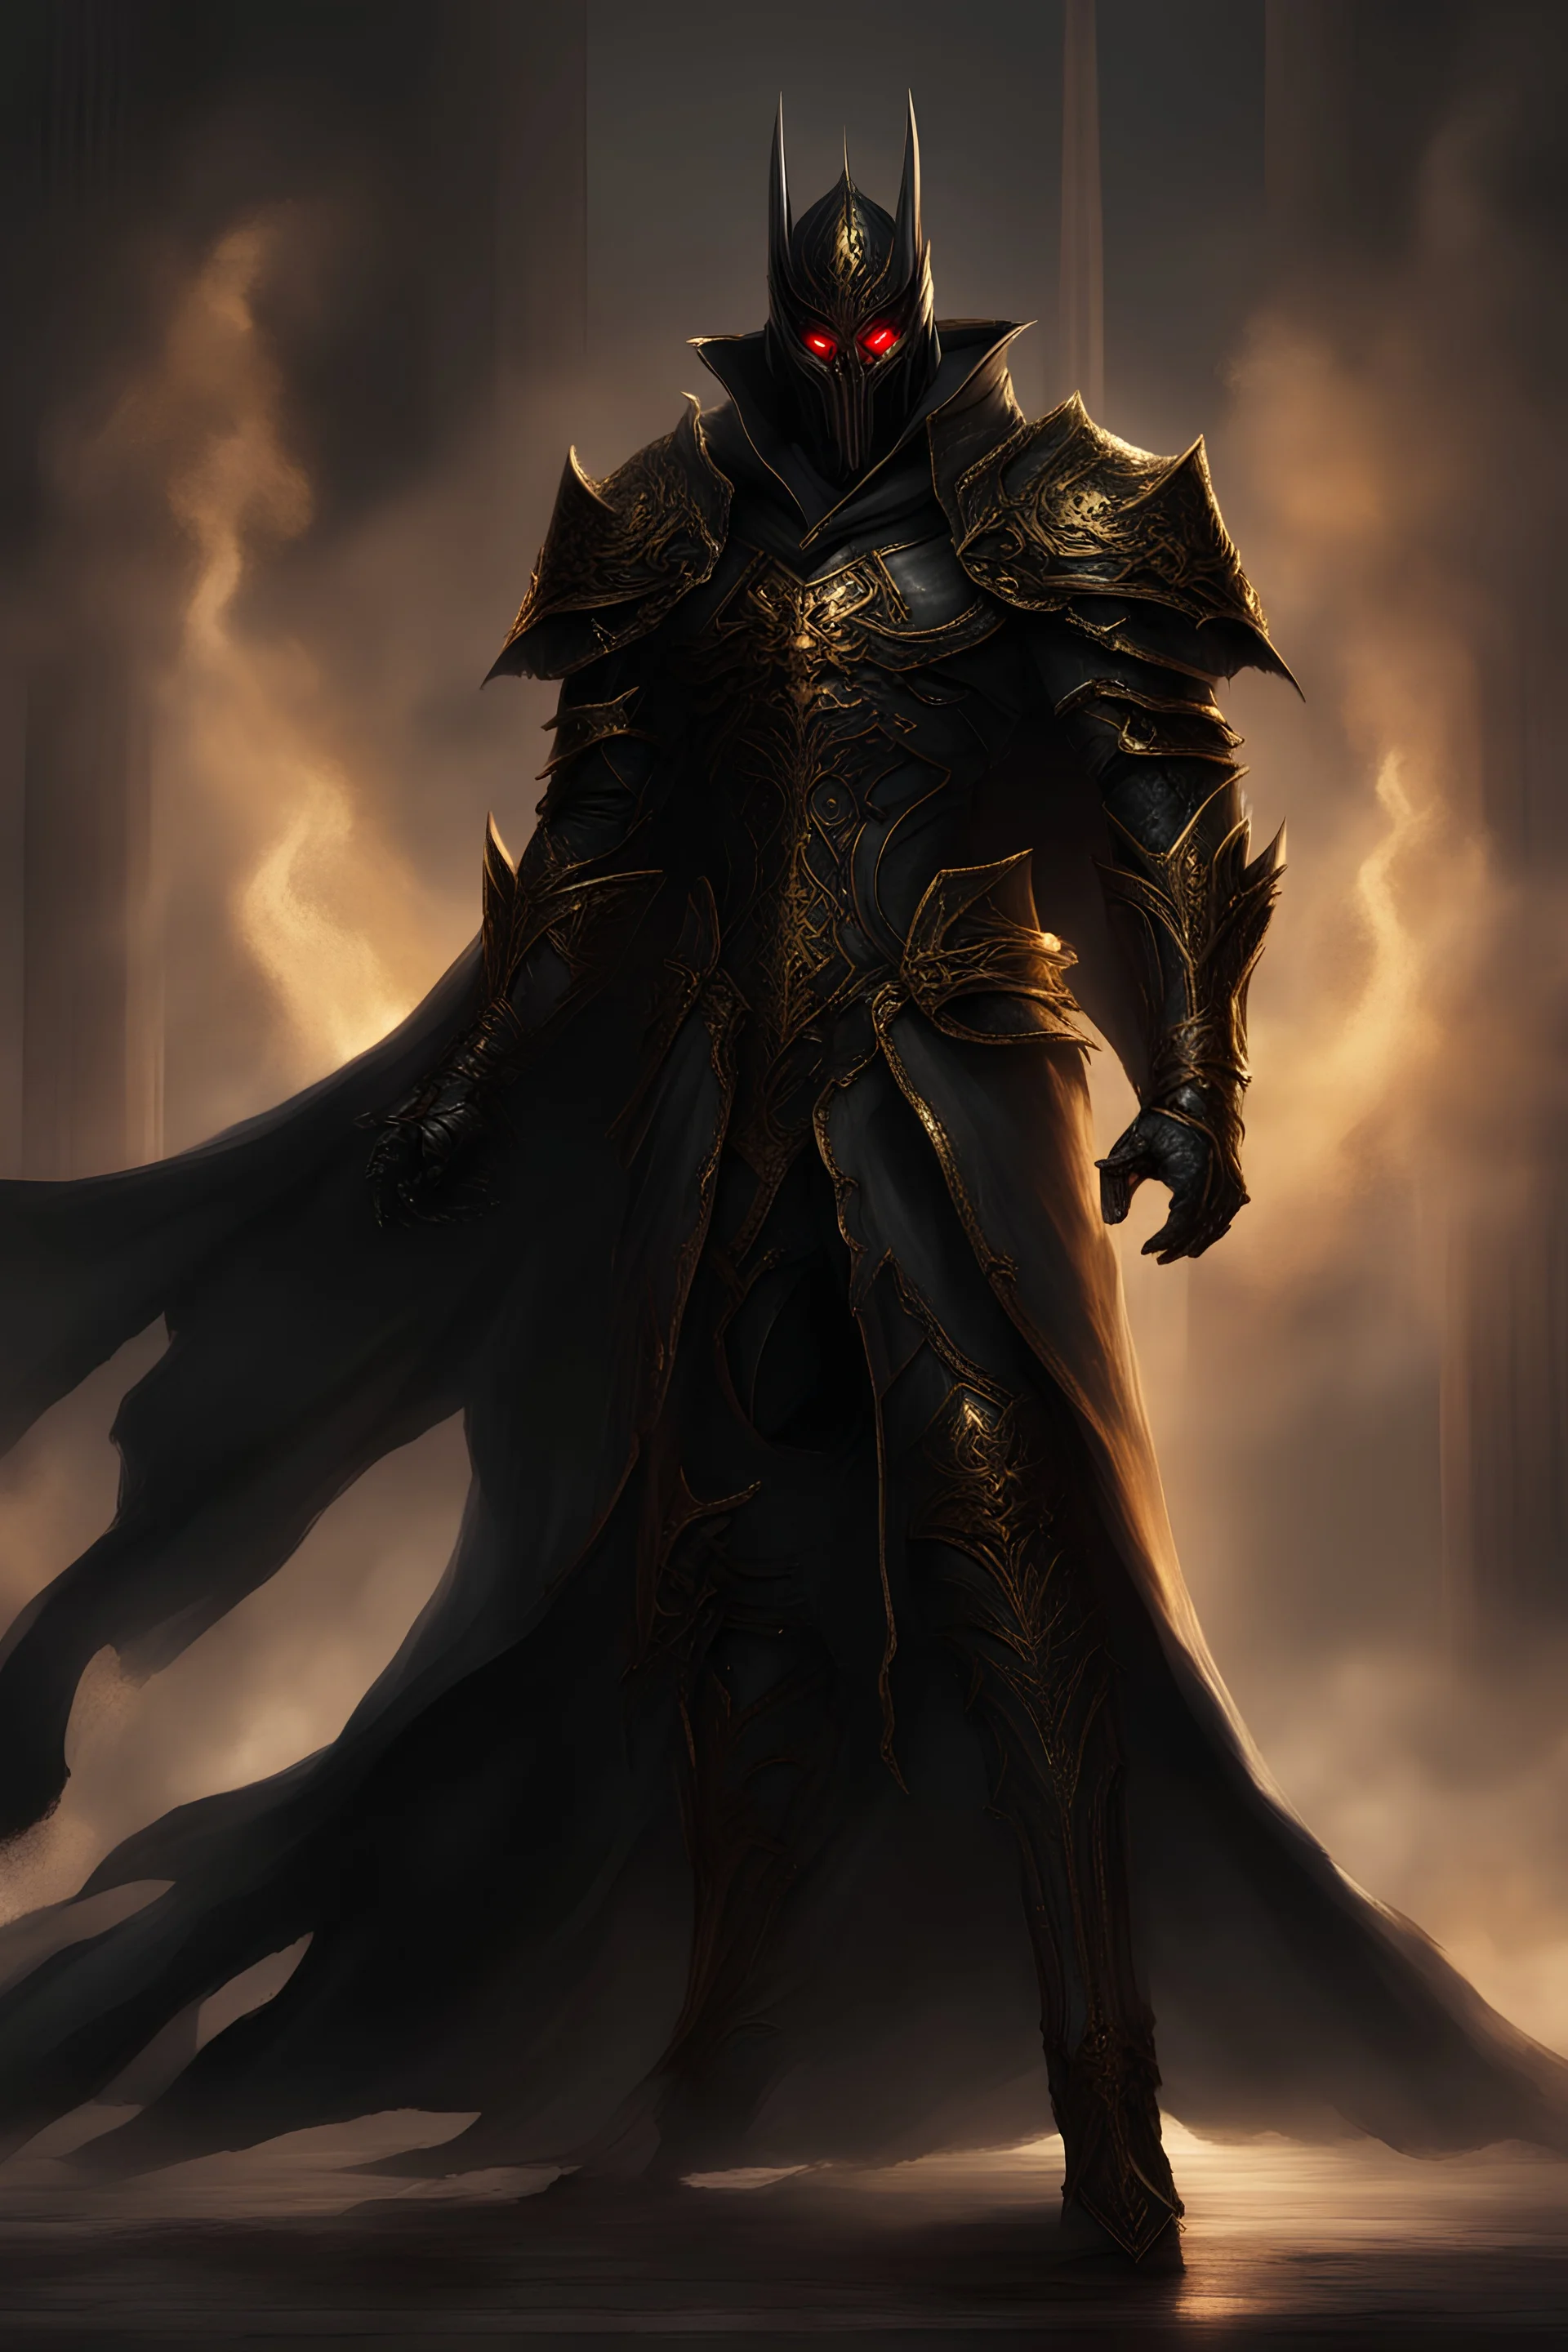 handsome Dark lord in black and gold armor with grey skin and red eyes, and a ghostly black flowing cape